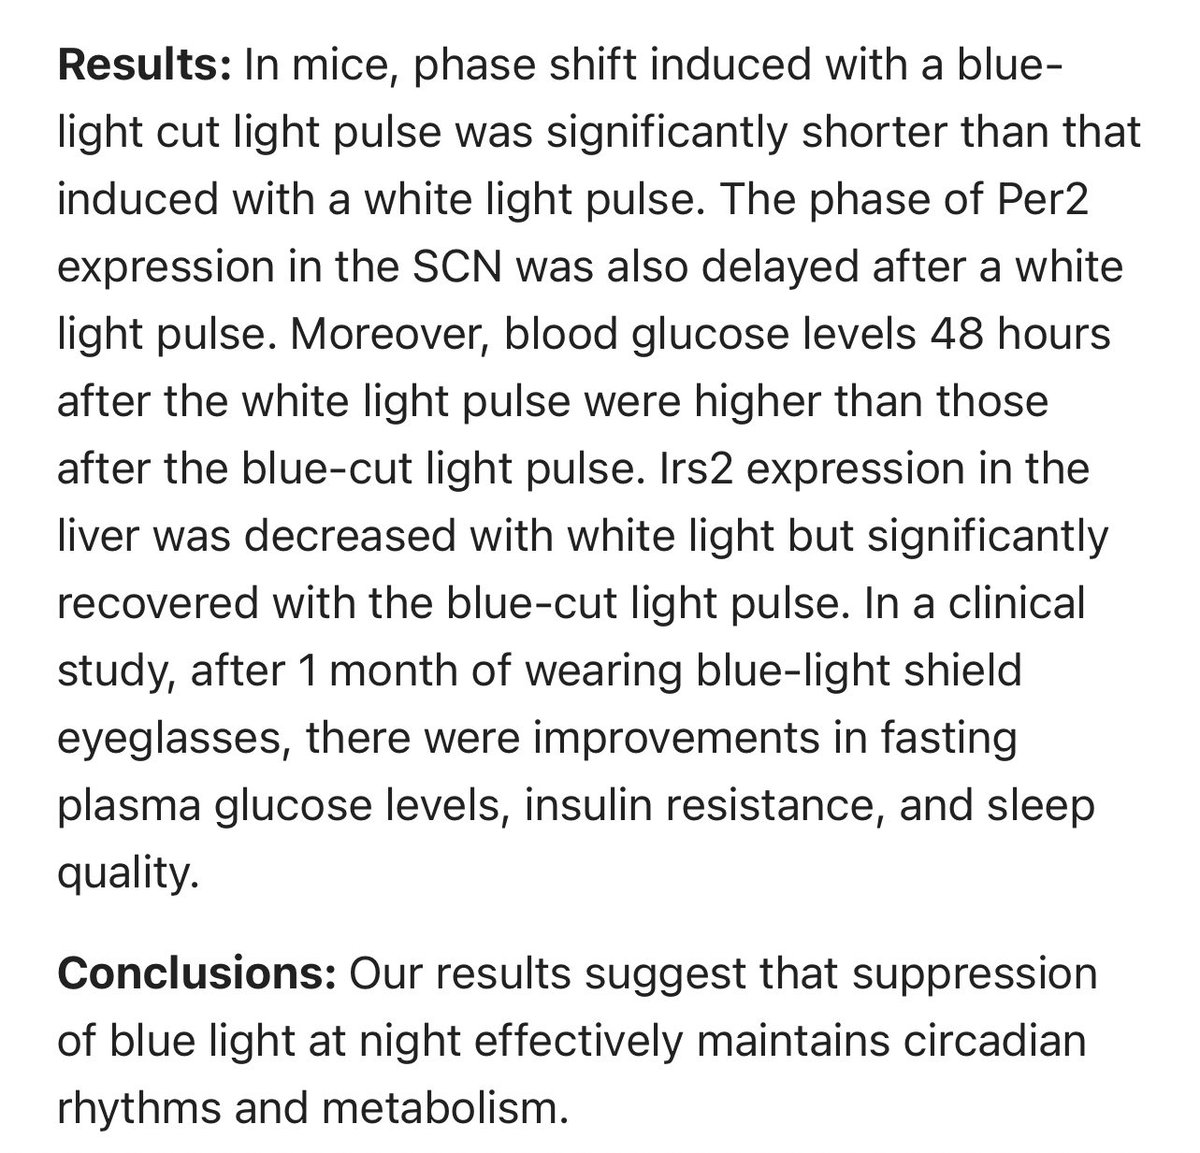 Suppression of Blue Light at Night Ameliorates Metabolic Abnormalities by Controlling Circadian Rhythms  https://pubmed.ncbi.nlm.nih.gov/31504080/ In nocturnal mice, will have an even worse impact on diurnal mammals.